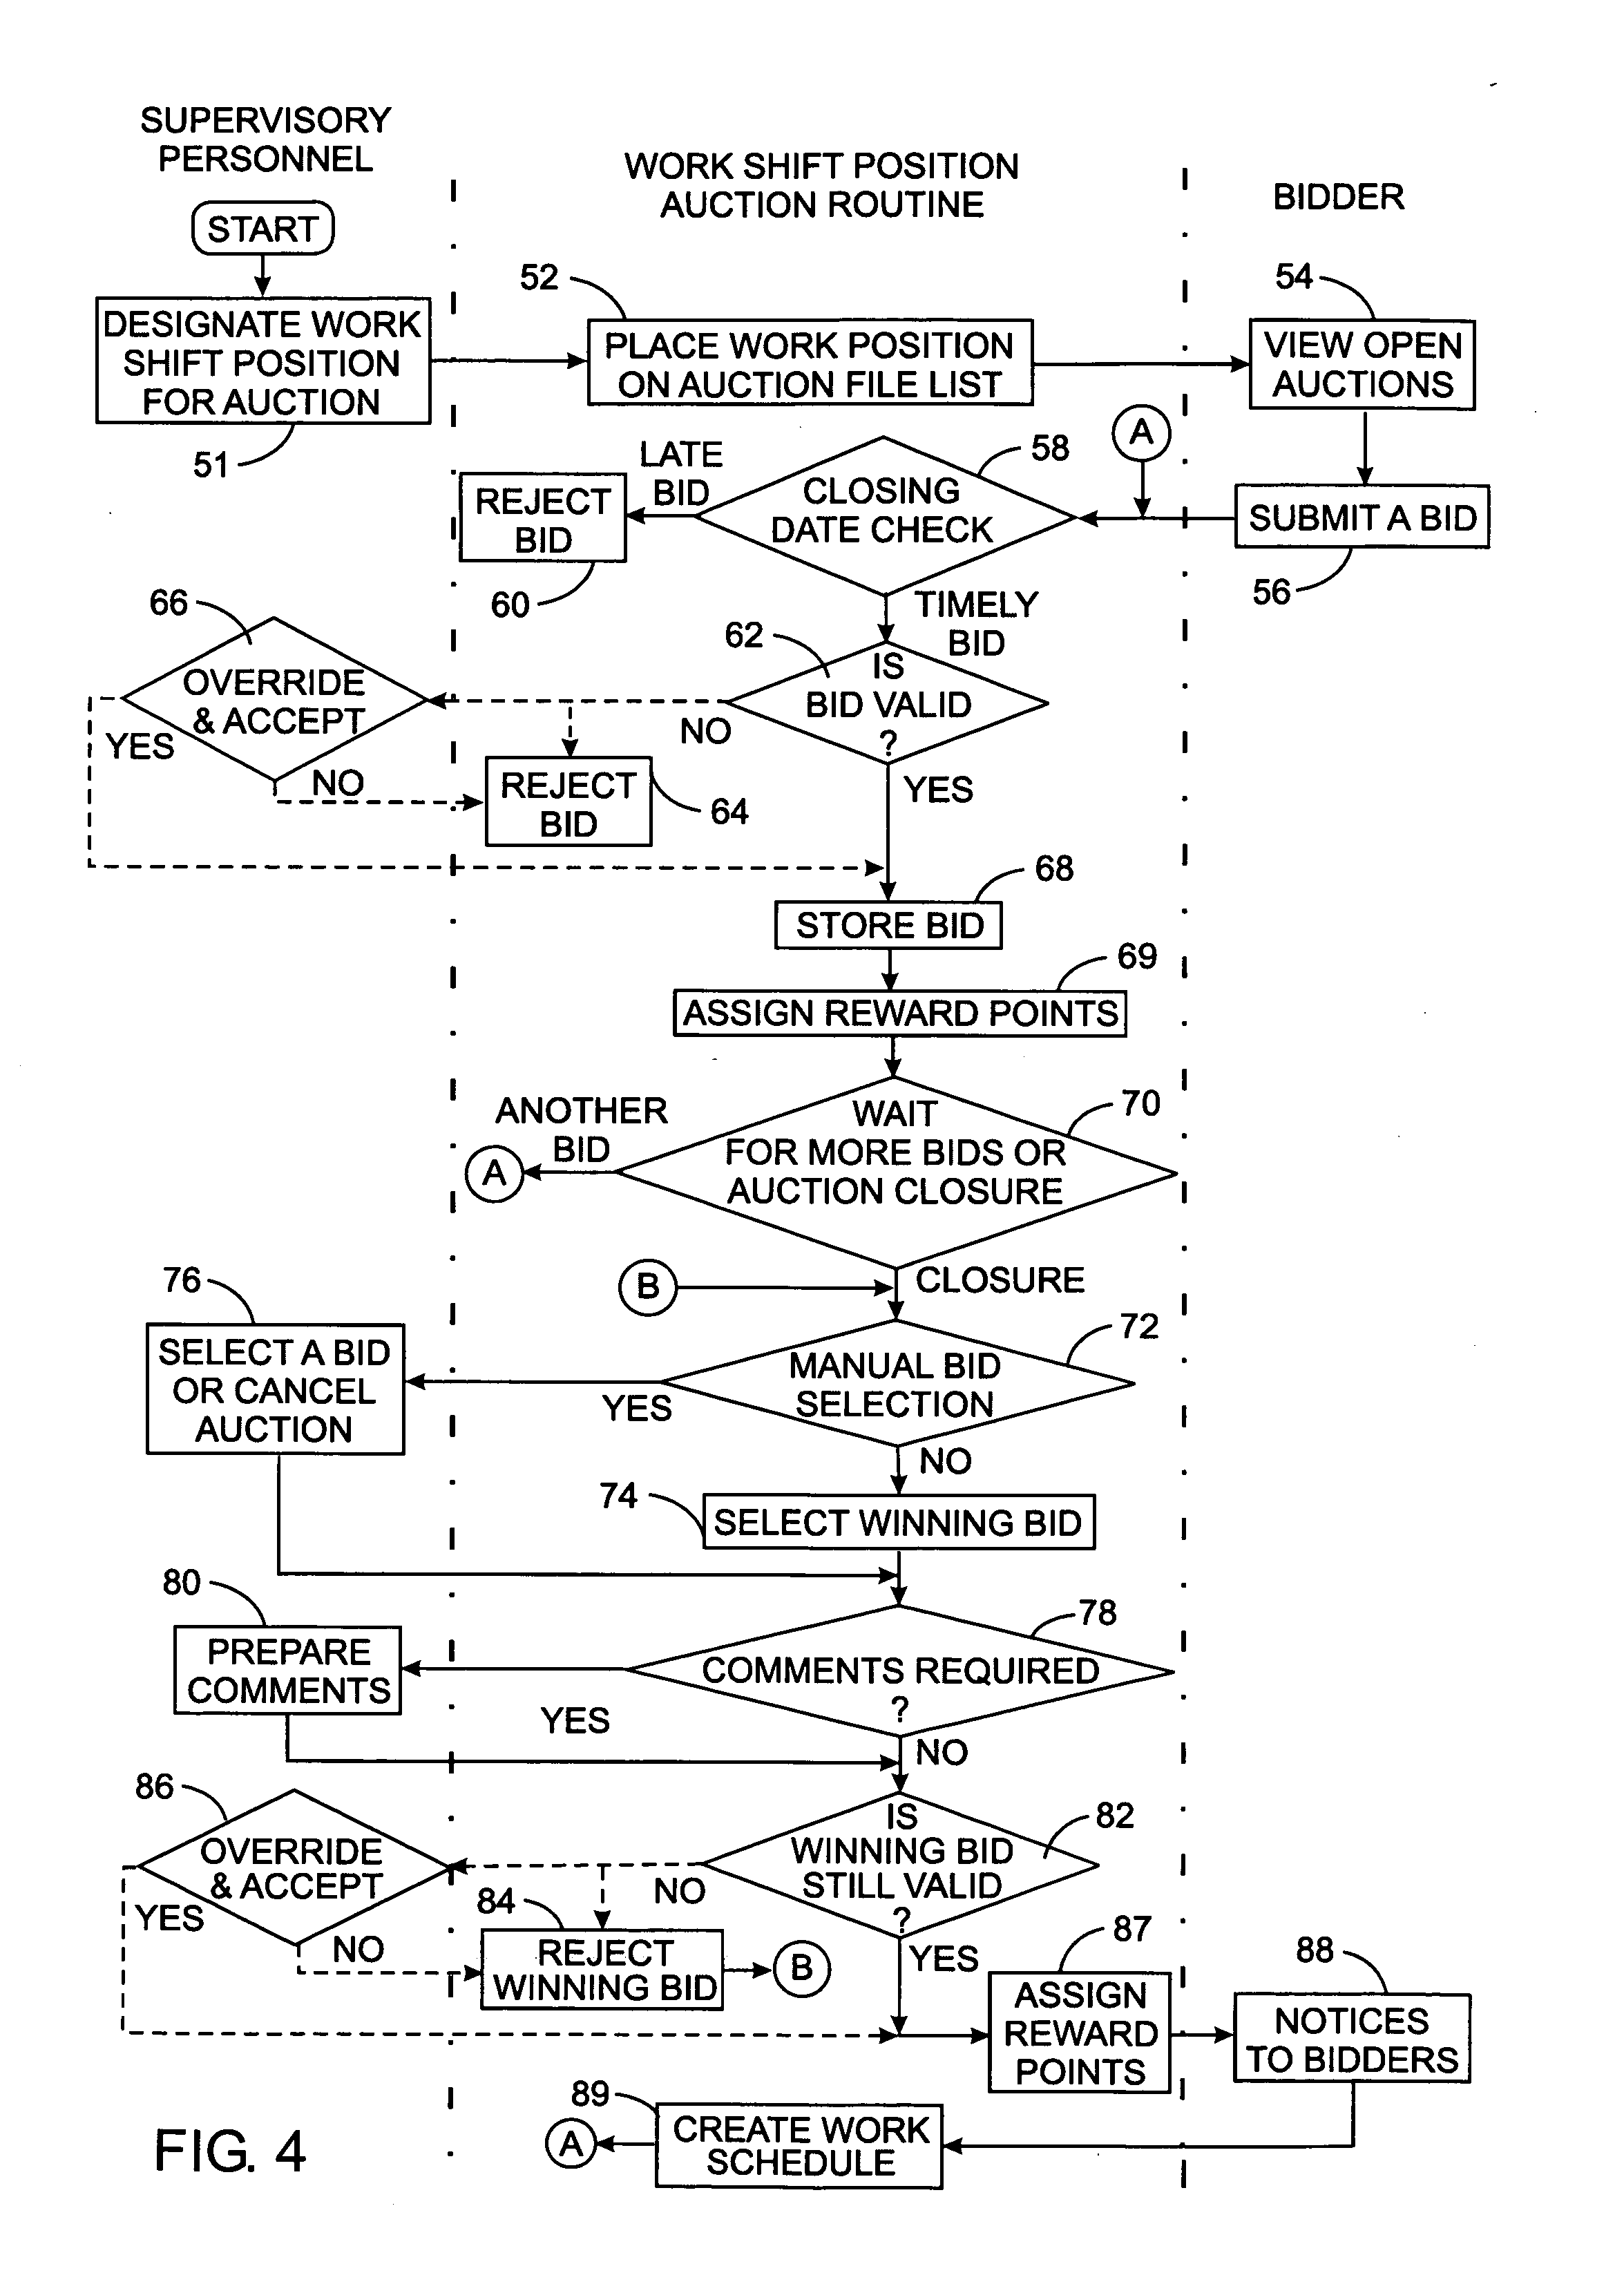 Automated auction method for staffing work shifts